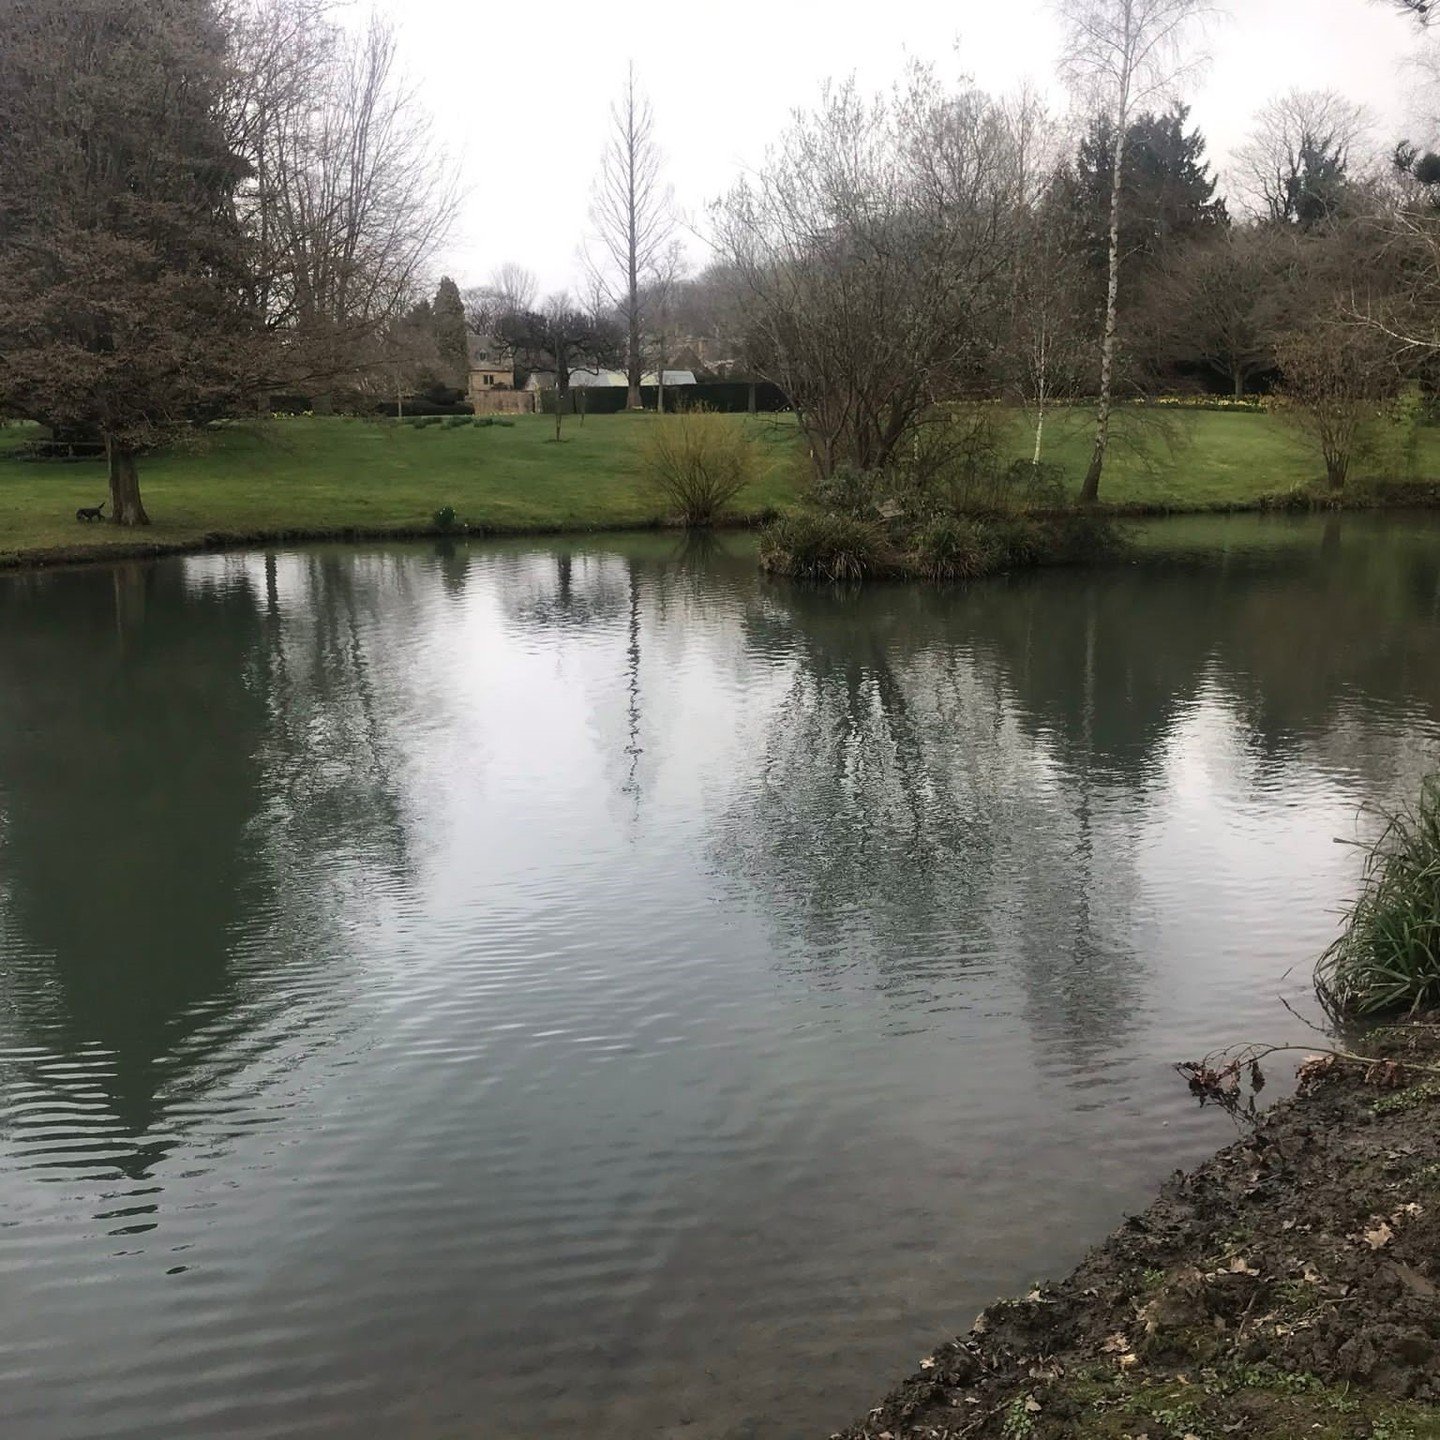 Lake creation and reshaping is just one of the many services we offer. If your pond or lake appears to be in poor condition and requires a transformation, please reach out to us!

Swipe right to view the lake's appearance prior to its transformation.